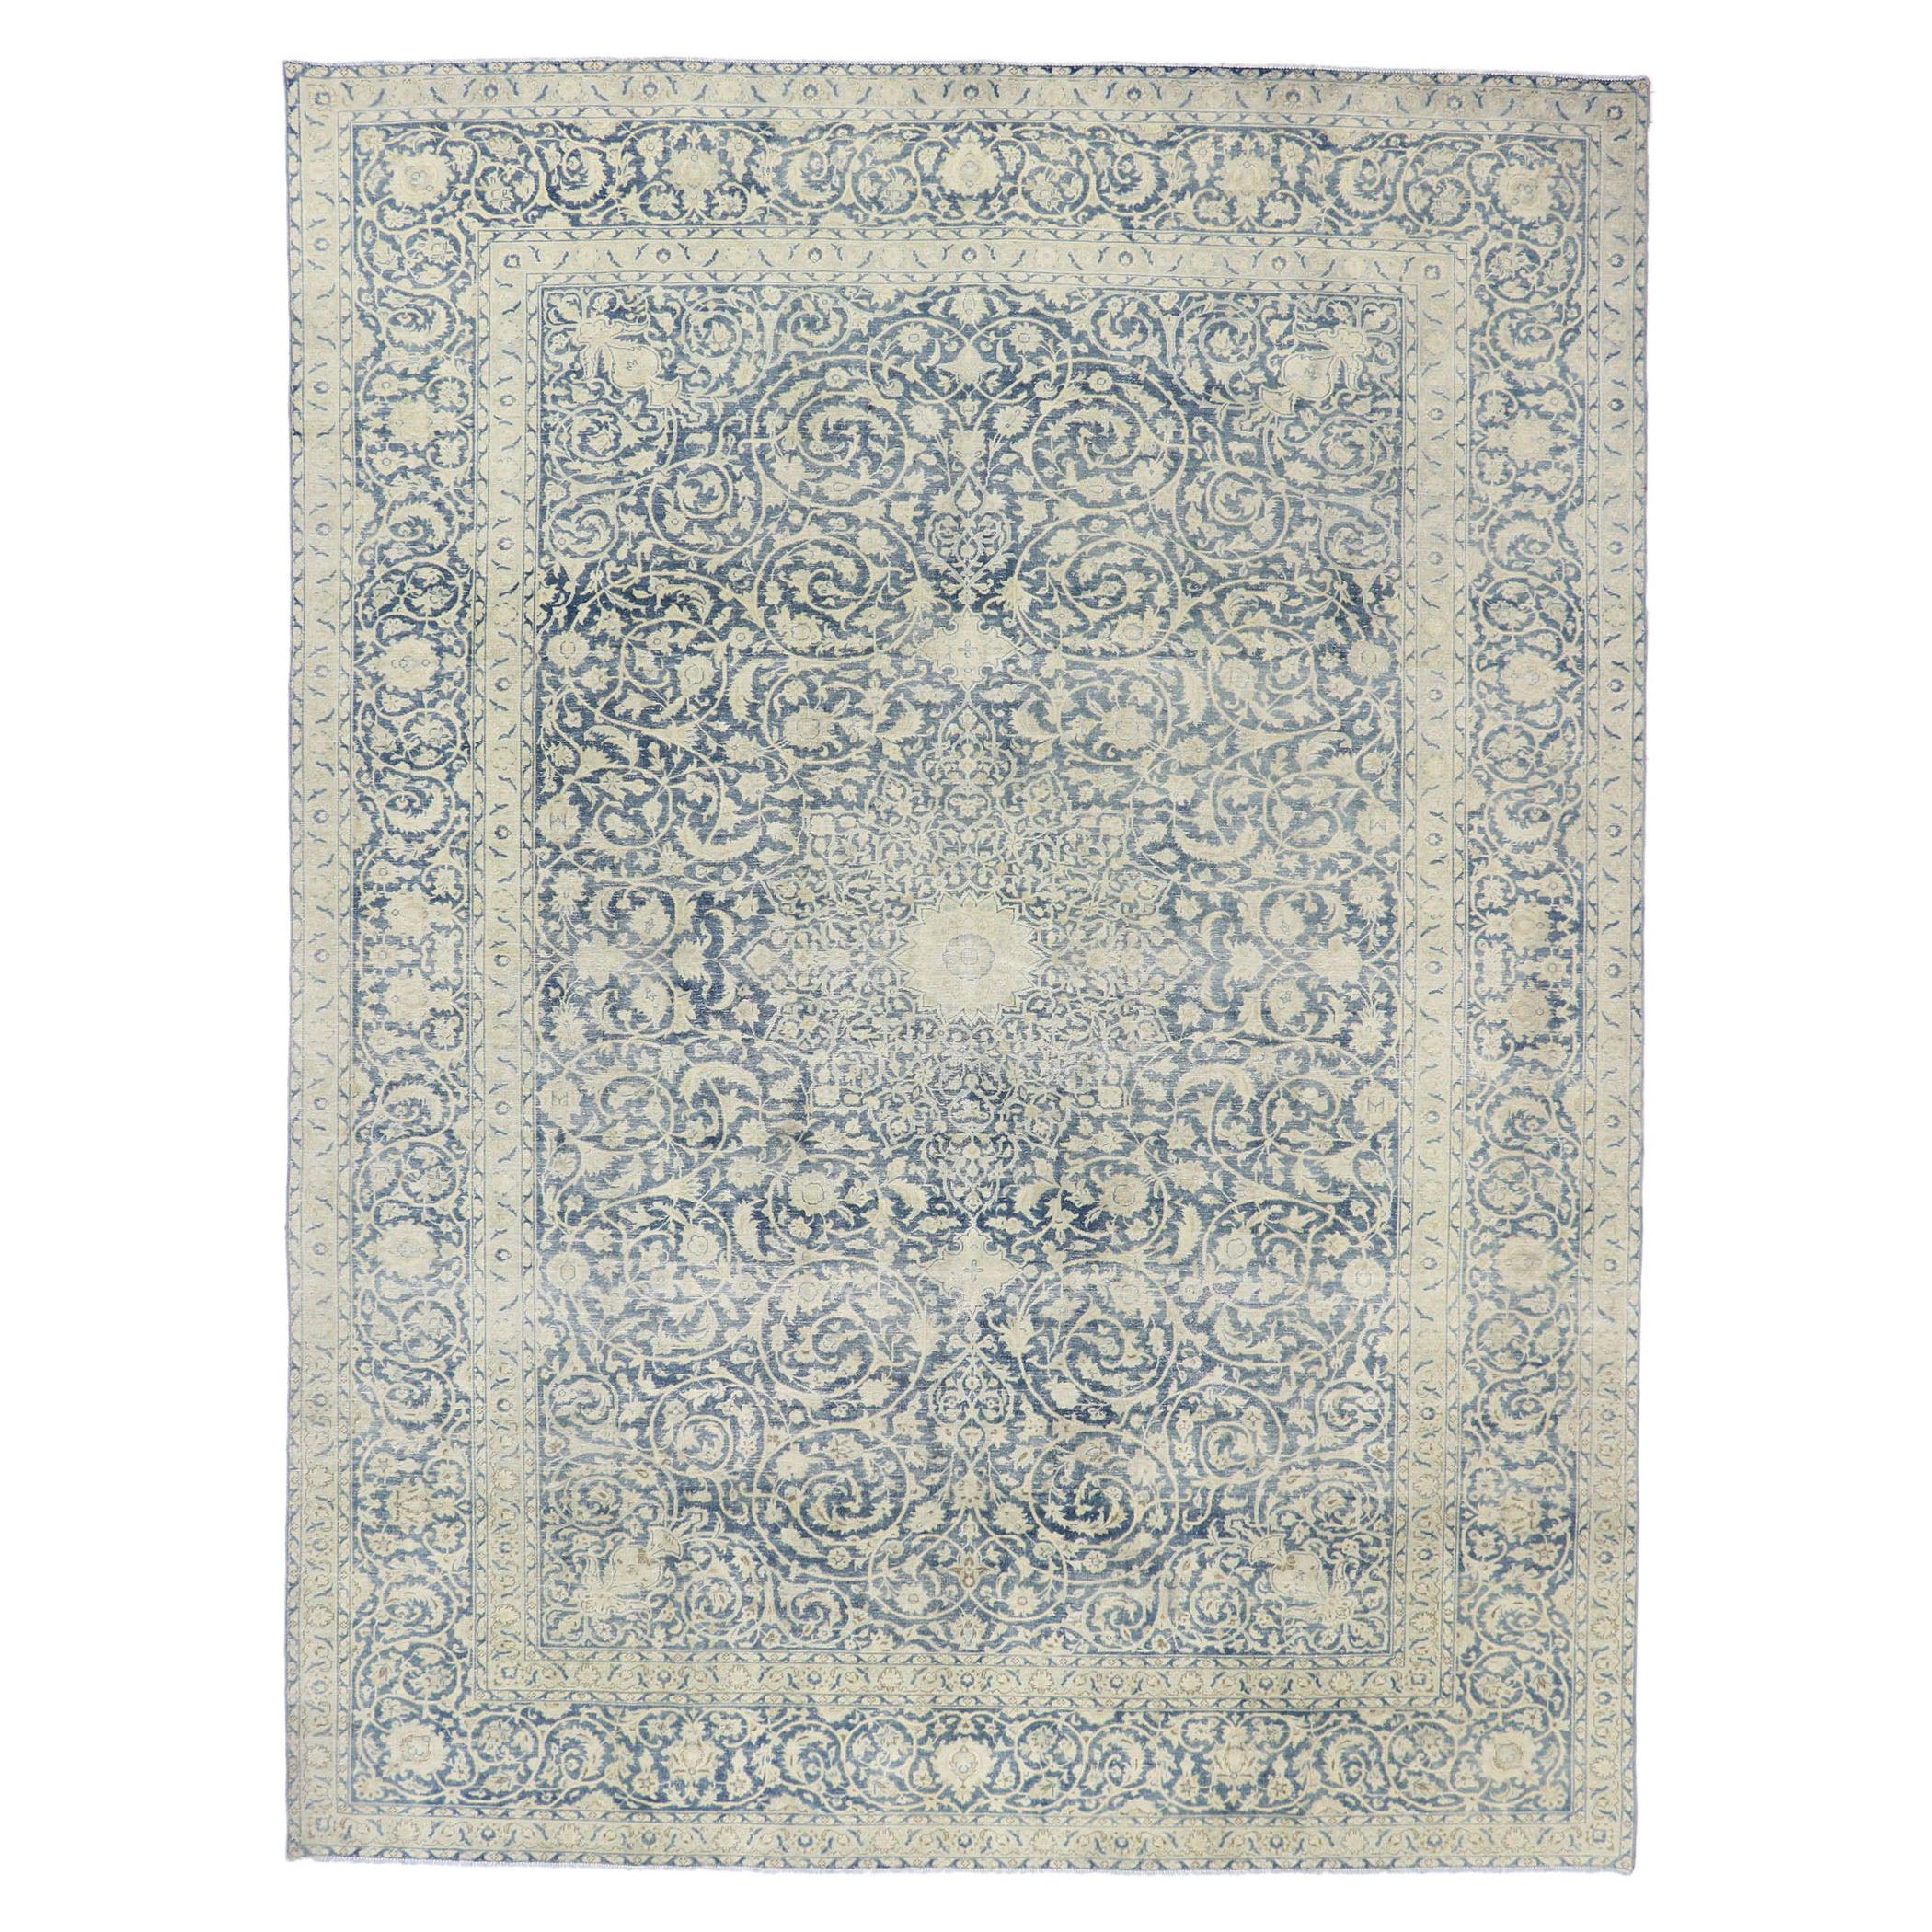 Distressed Antique Persian Tabriz Rug with Rustic Greek Mediterranean Style For Sale